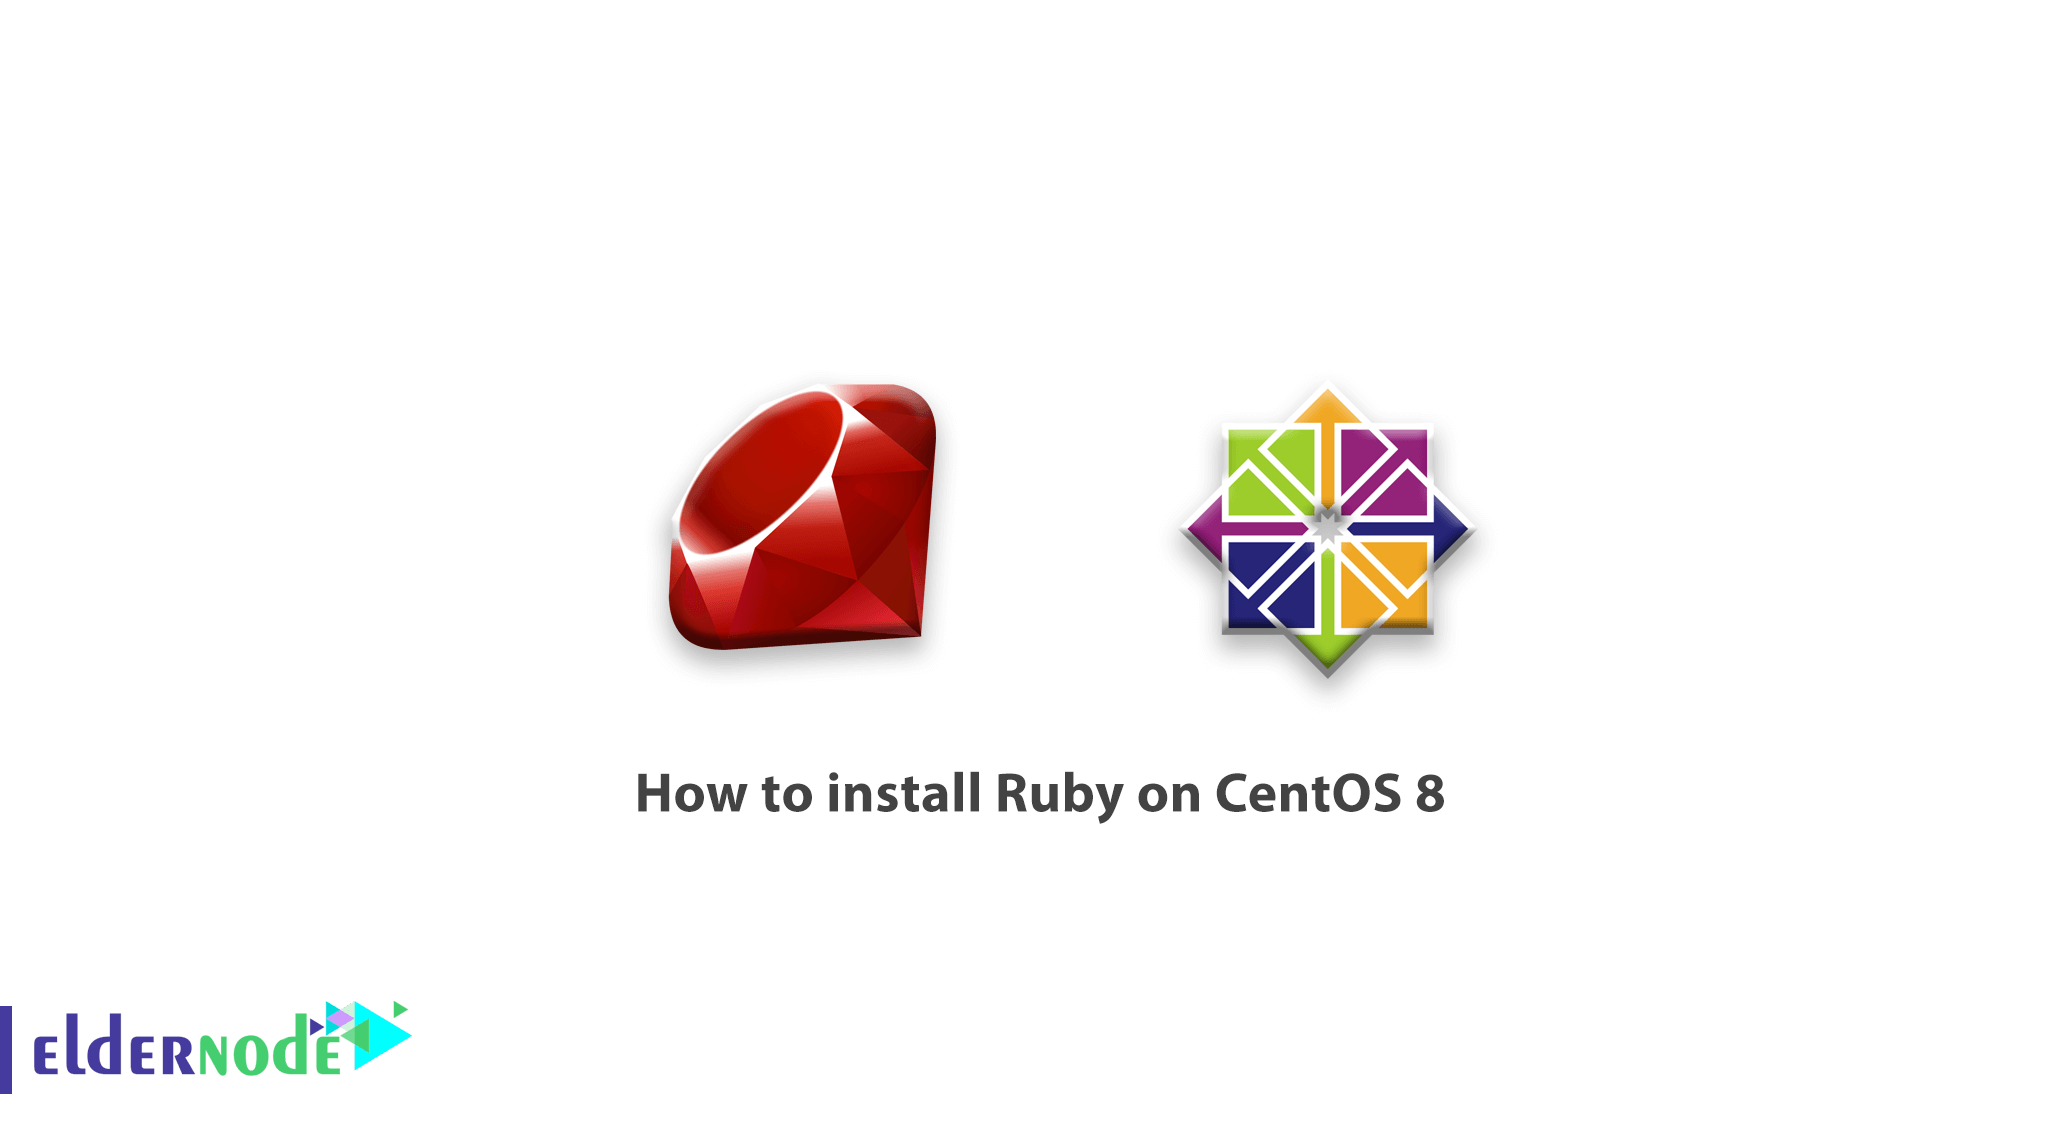 How to install Ruby on CentOS 8